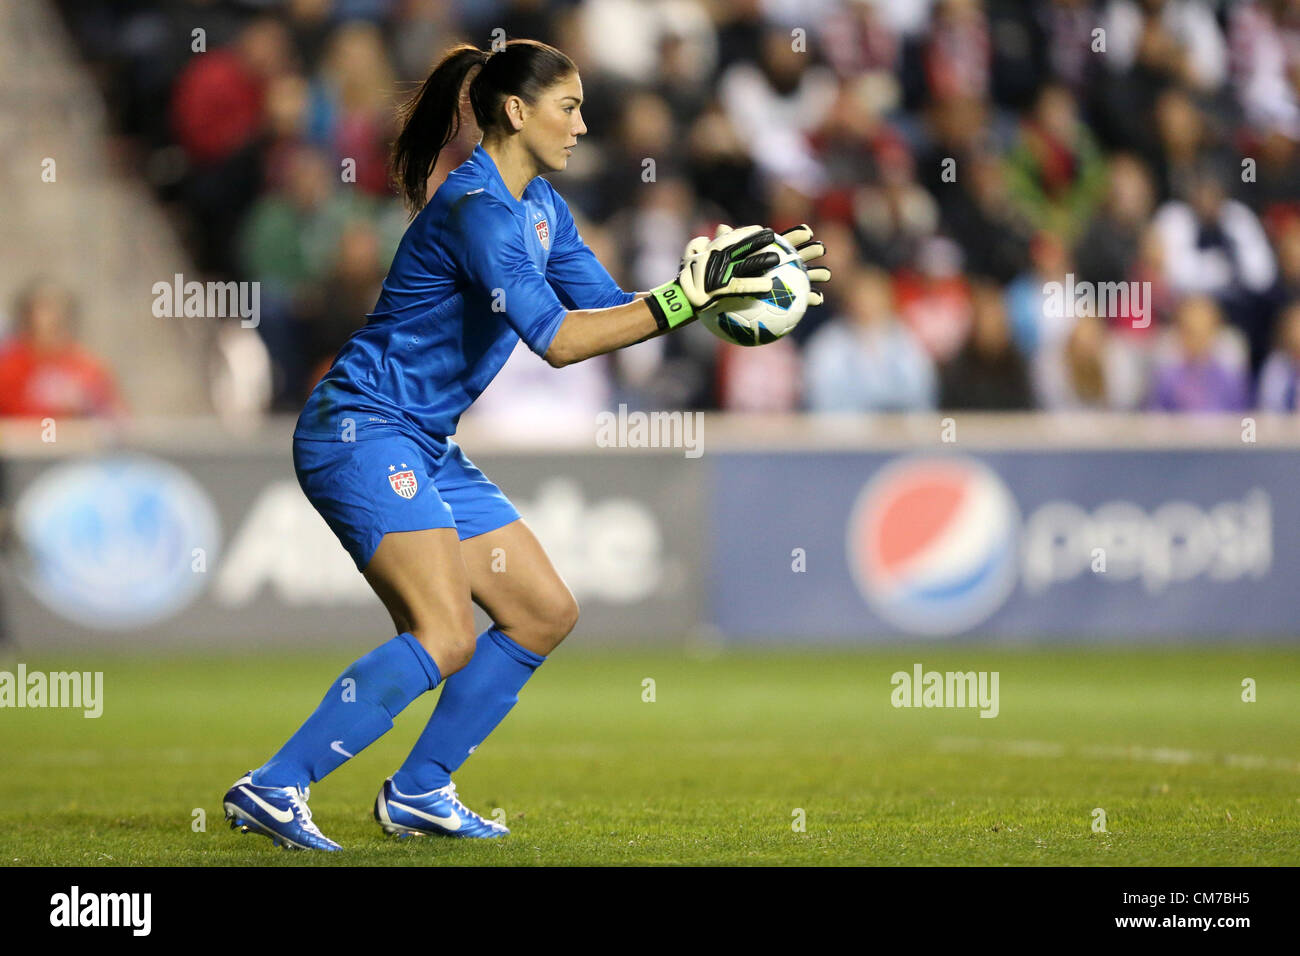 20.10.2012. Chicago, USA.  Hope Solo (USA) makes a save. The United States Women's National Team played the Germany Women's National Team at Toyota Park in Bridgeview, Illinois in a women's international friendly soccer match. The game ended in a 1-1 tie. Stock Photo